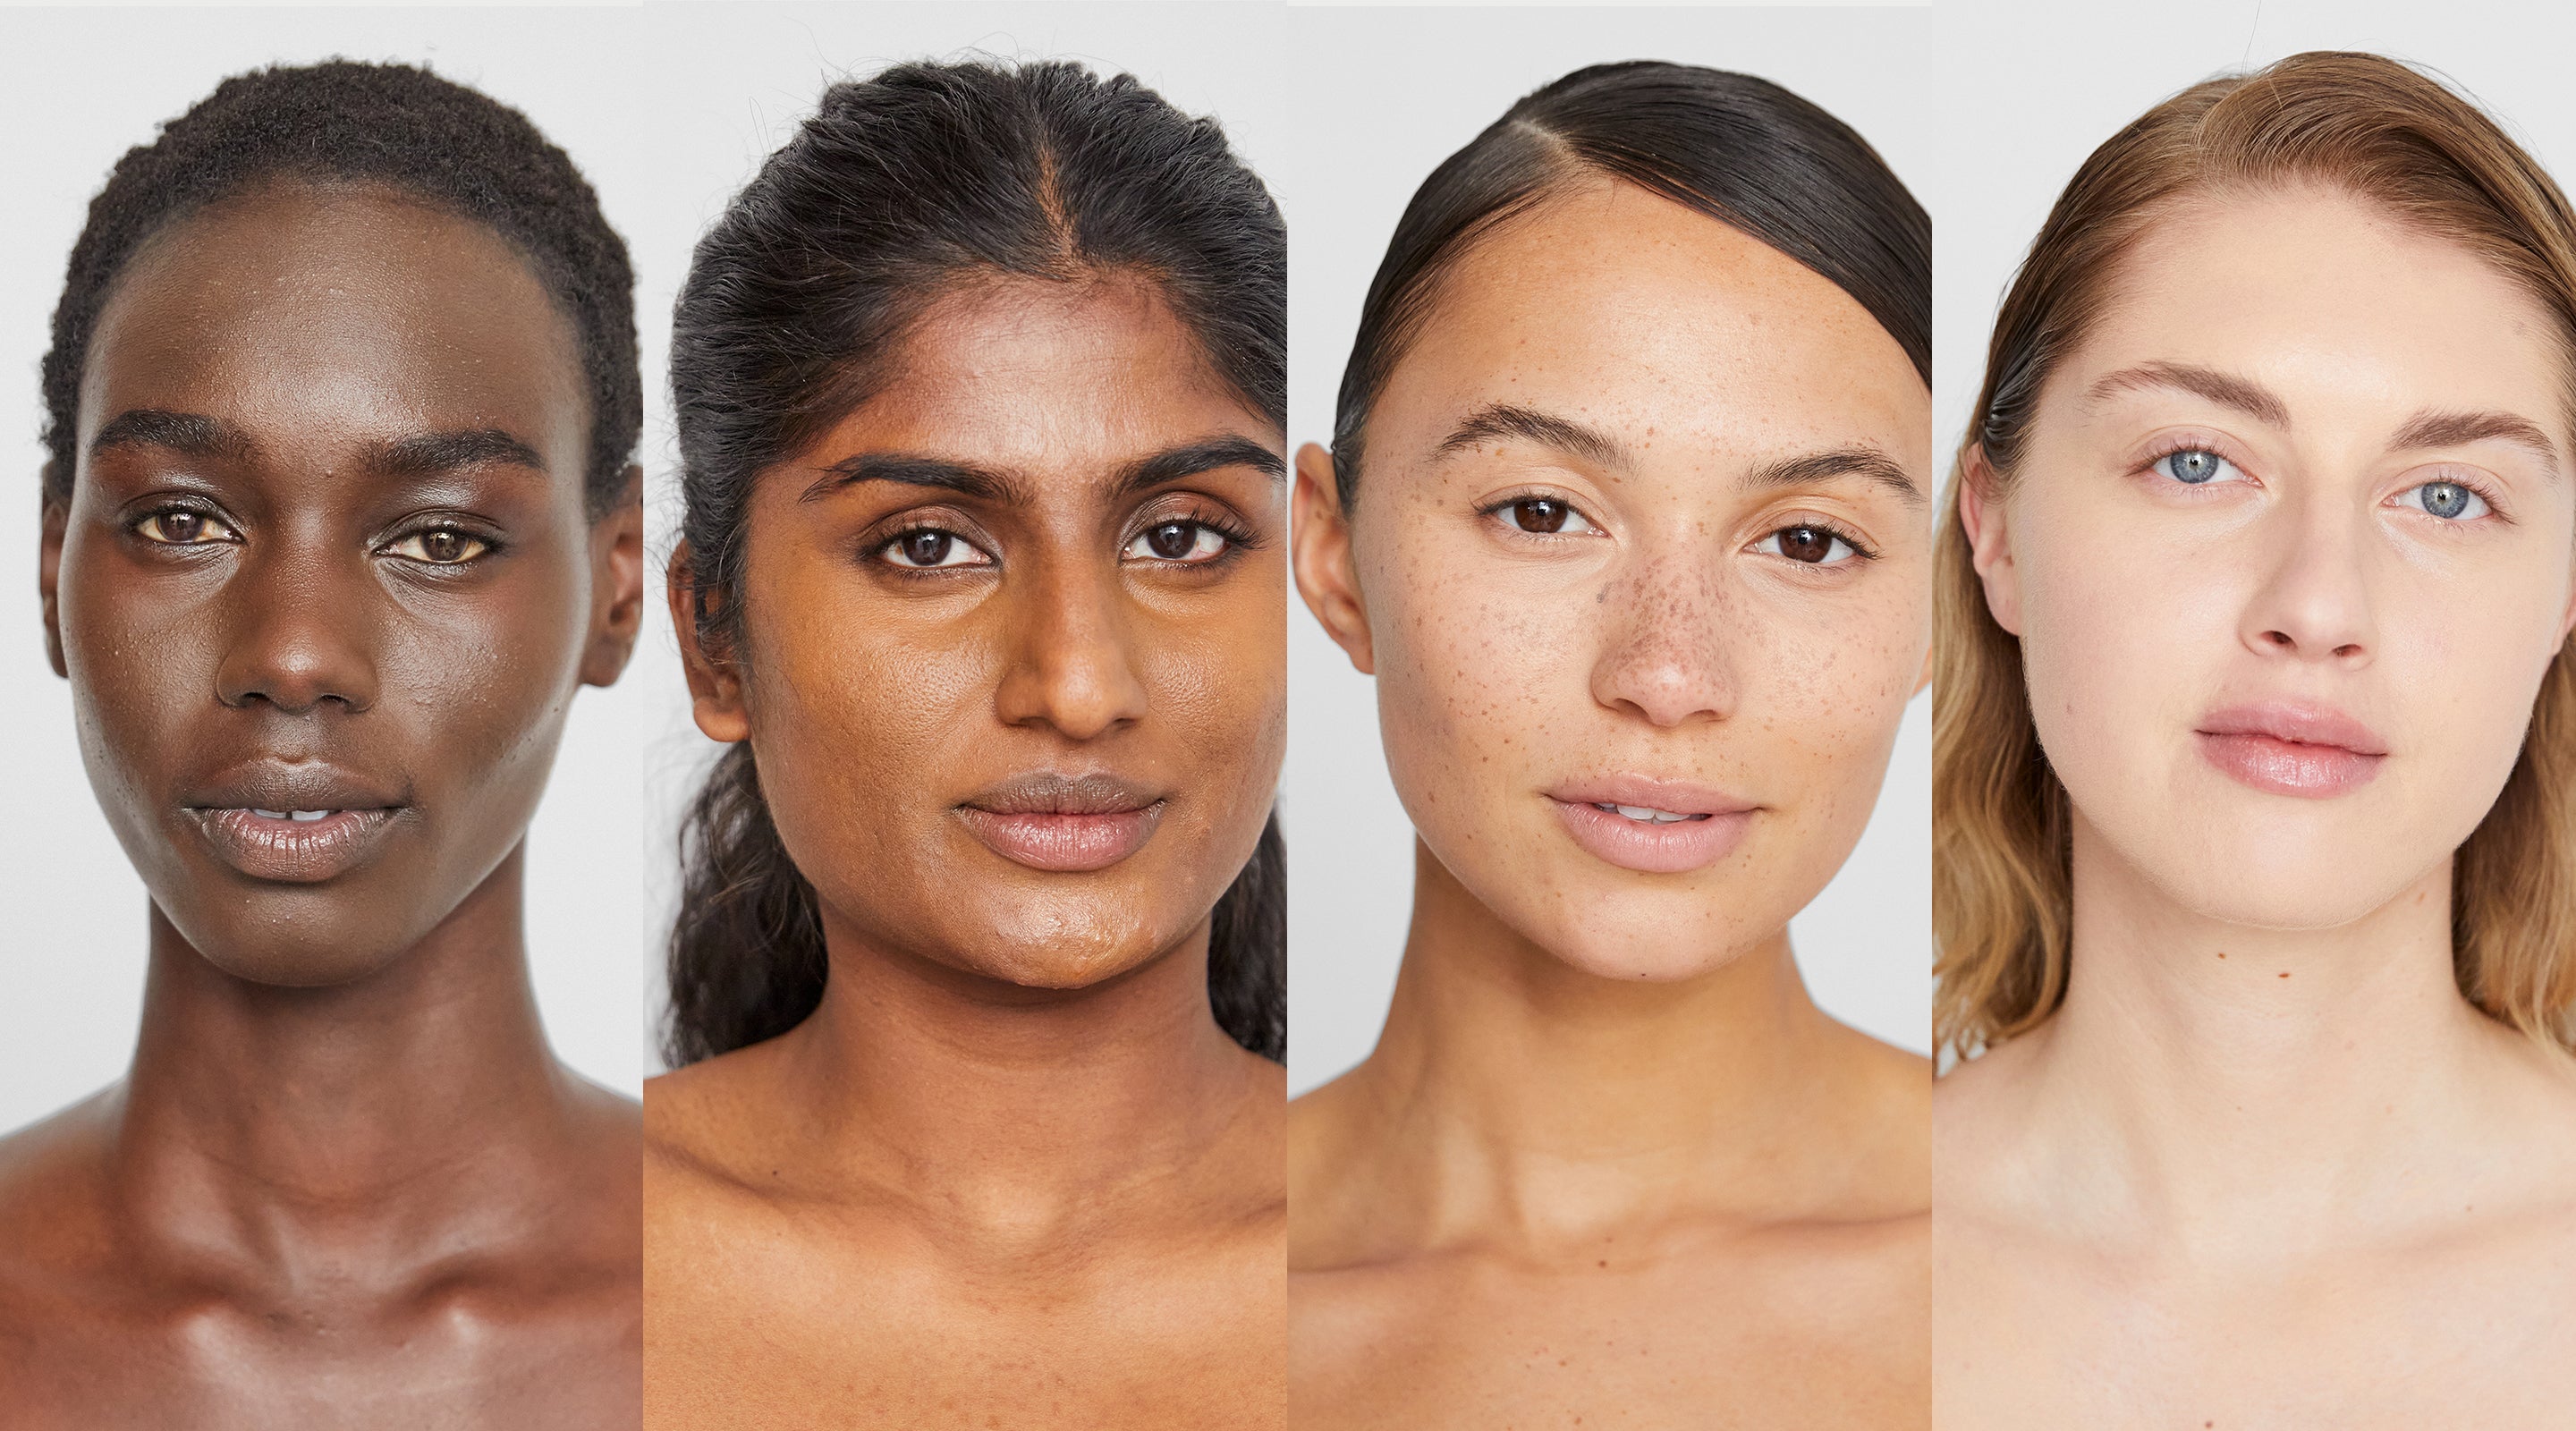 Fenty Beauty Has Launched A Virtual Shade Finder Tool